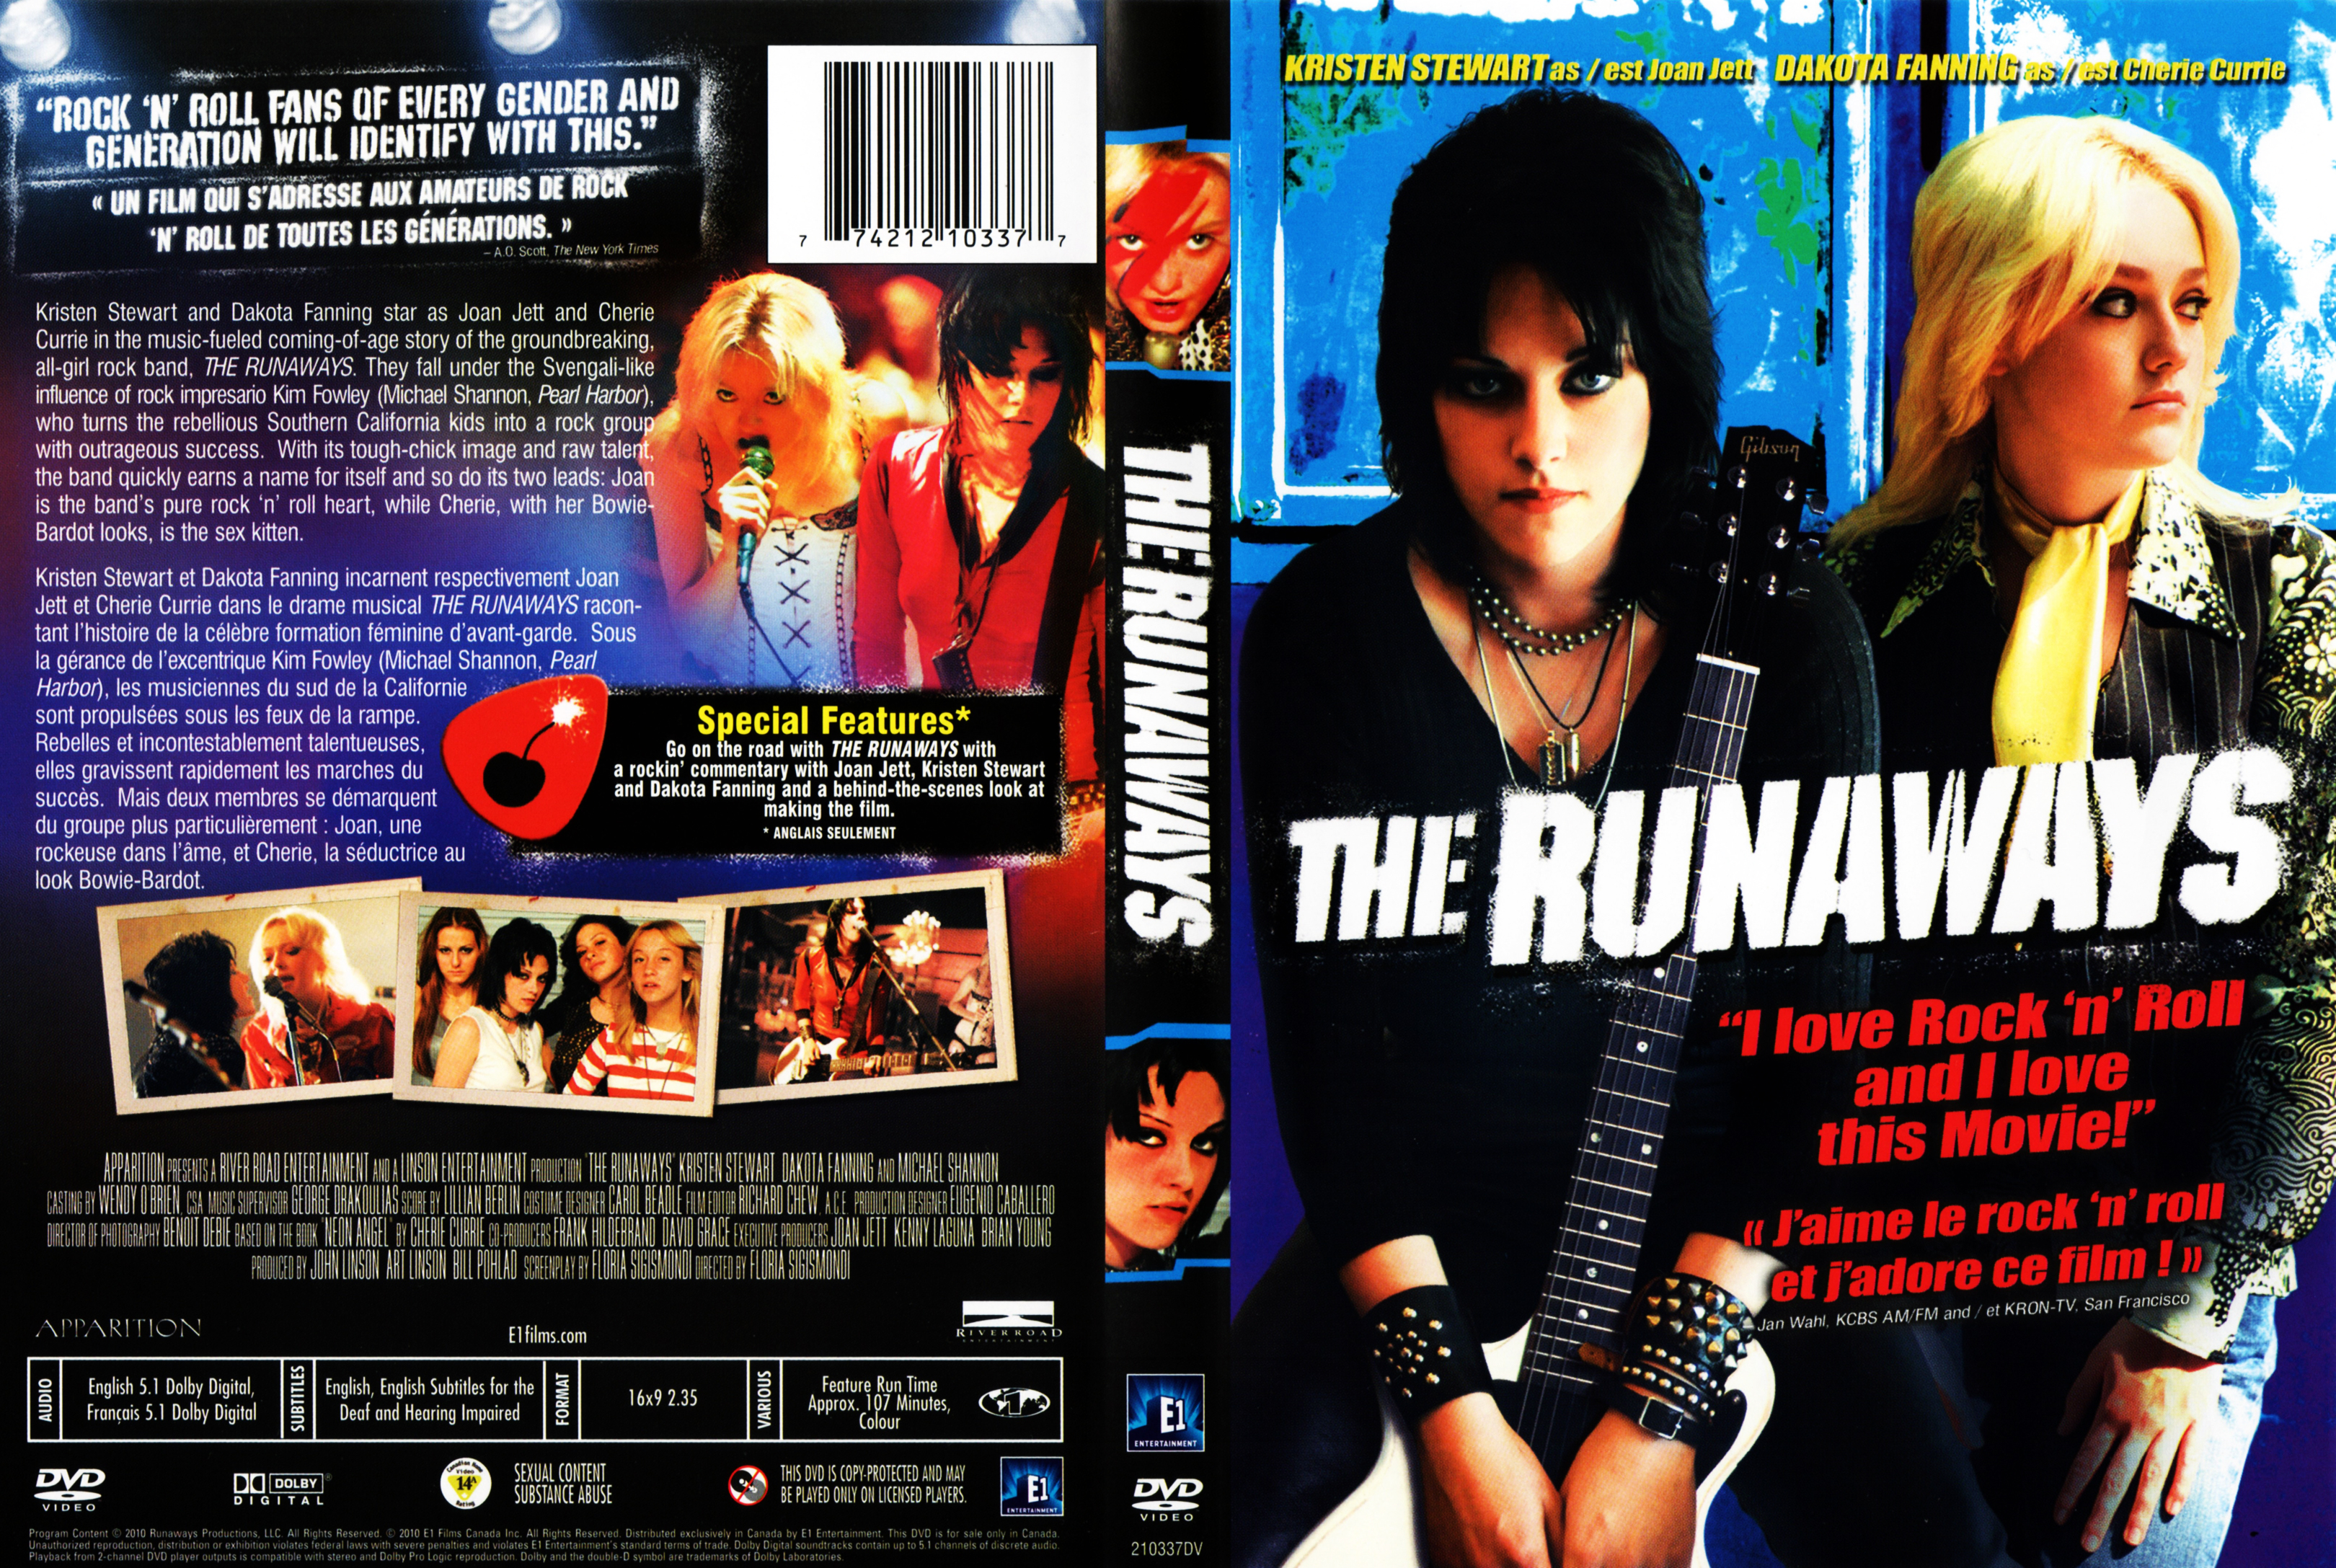 Jaquette DVD The runaways (Canadienne)